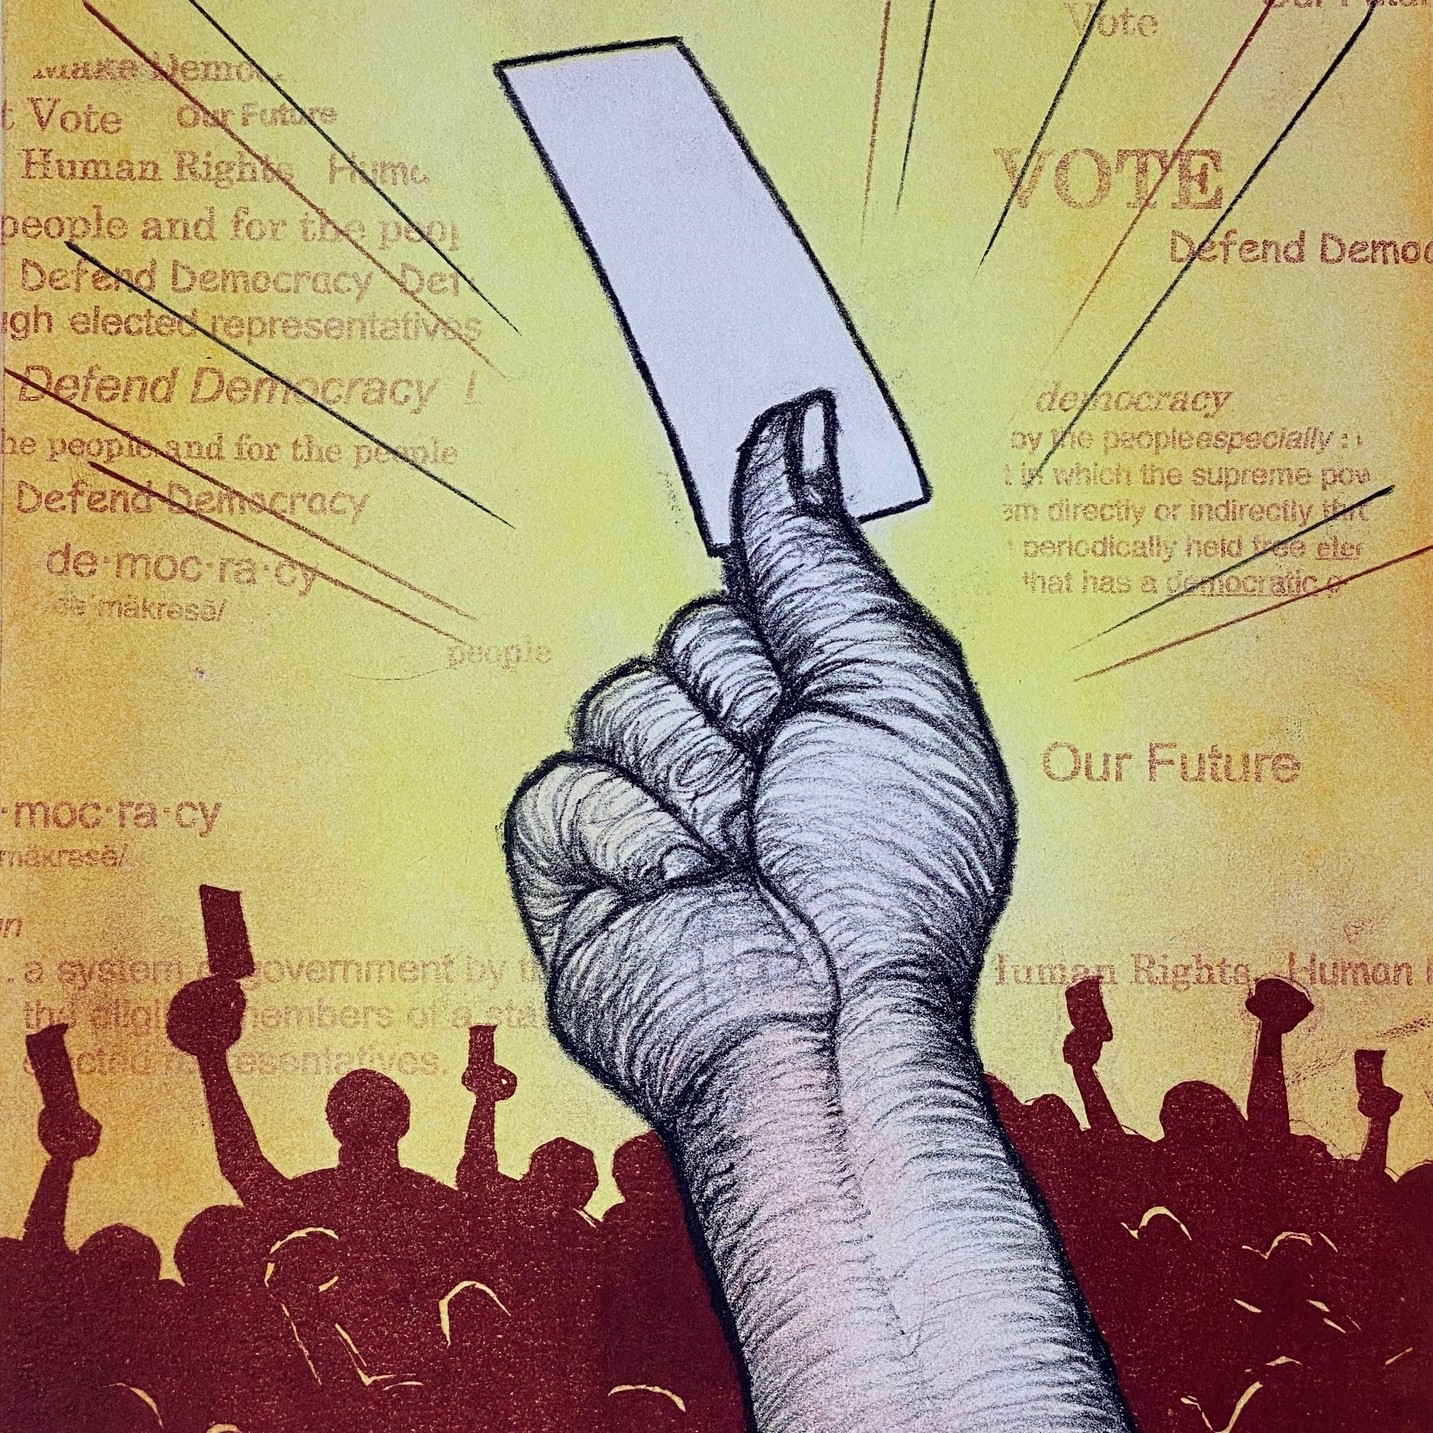  red outlined and shadowed people are holding up their hands with a piece of paper and in the foreground there is an arm and hand reaching out and holding a piece of paper with multiple phrases and words in the background.